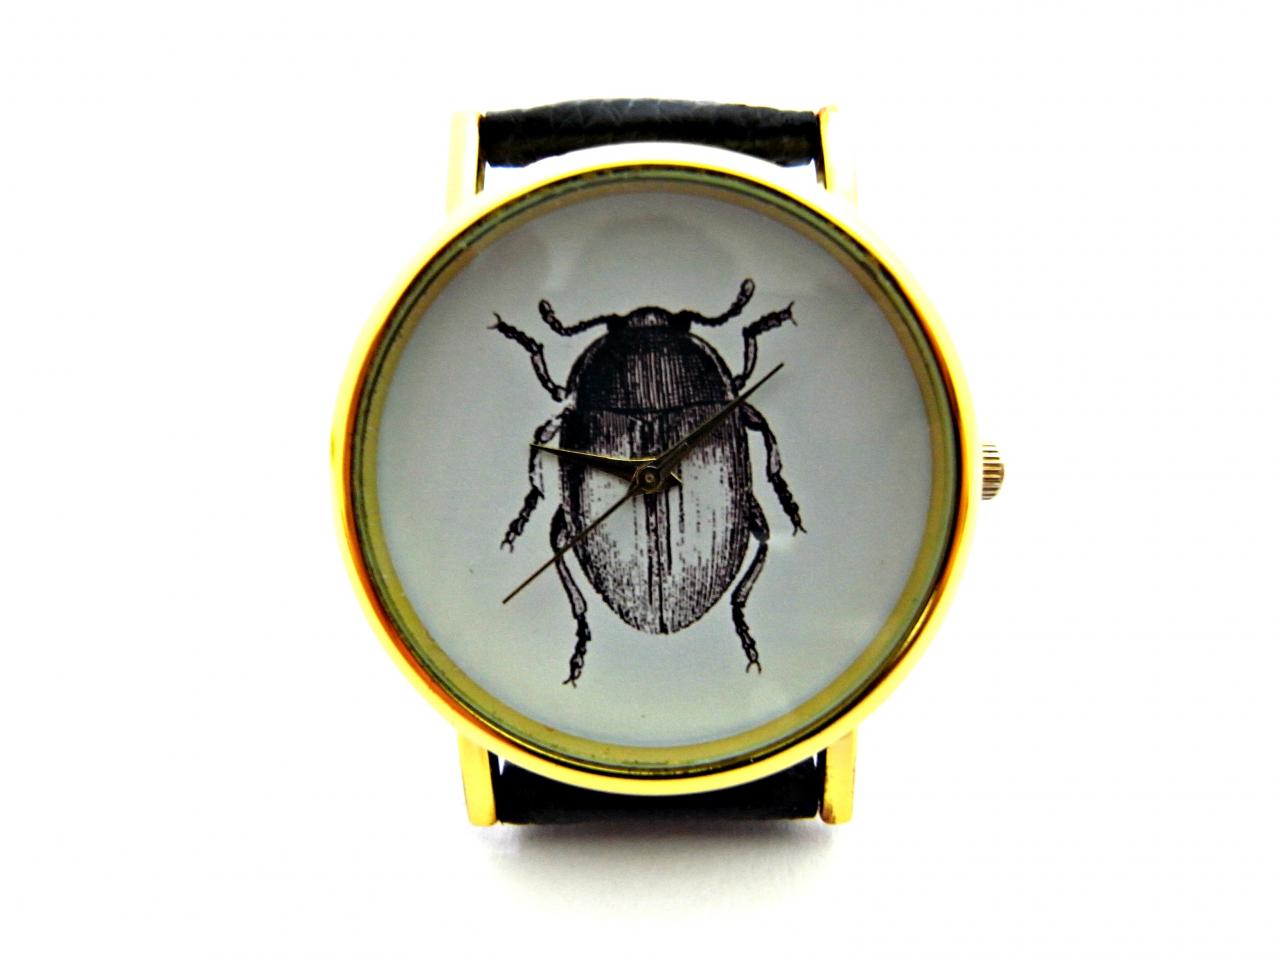 Beetle Insect Leather Wrist Watch, Woman Man Lady Unisex Watch, Genuine Leather Handmade Unique Watch #214